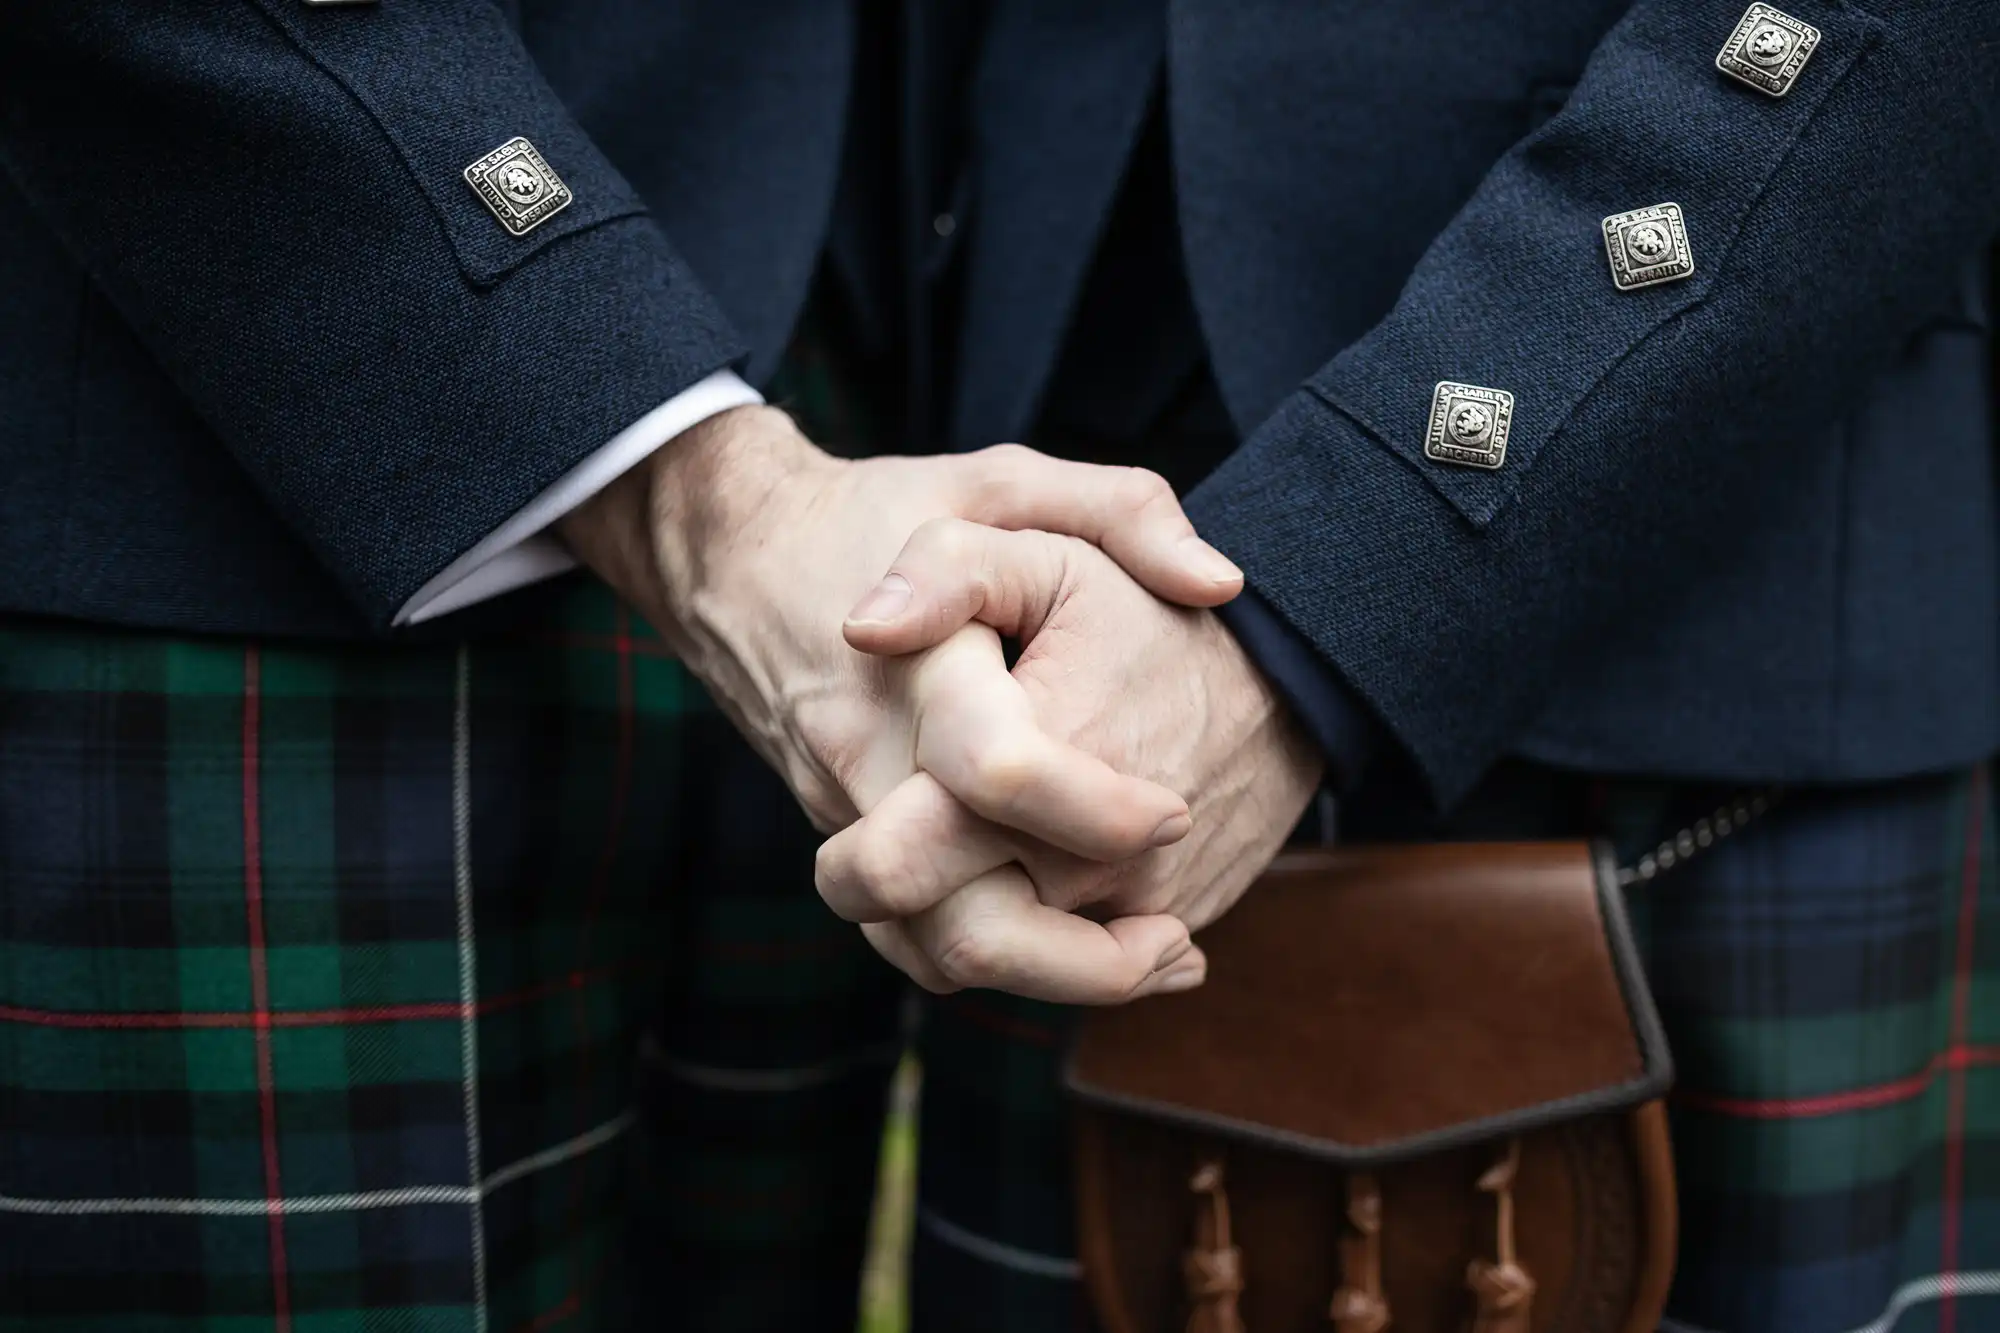 Two people in tartan kilts stand close together, with their hands clasped. They are wearing dark jackets with metal buttons and a small leather pouch.